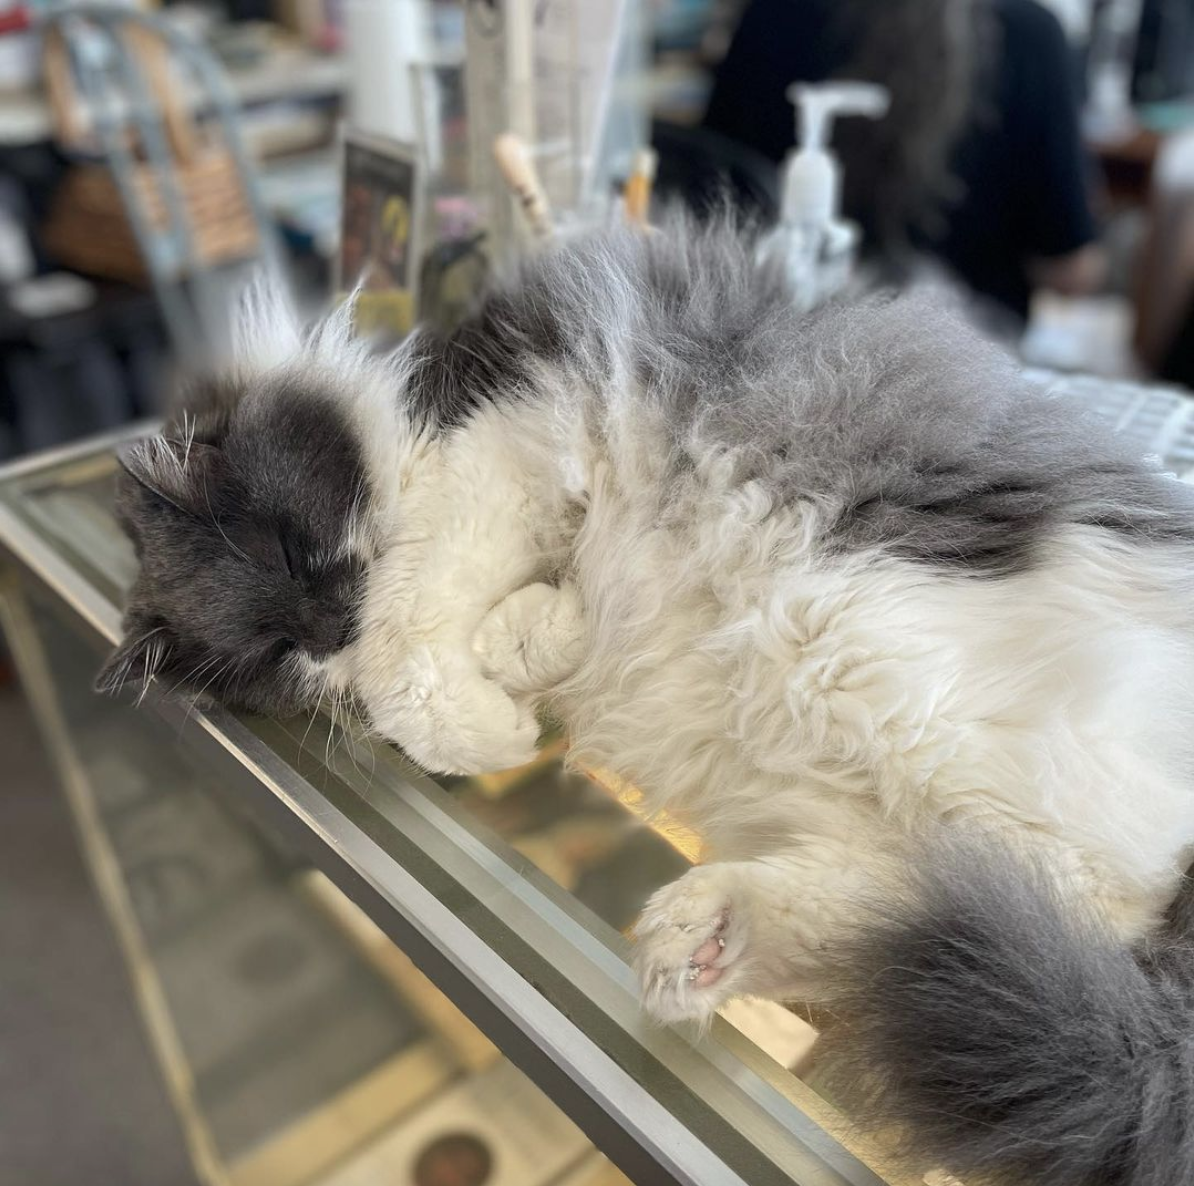 Big Boo, a fluffy gray and white cat, sleeps on the counter.